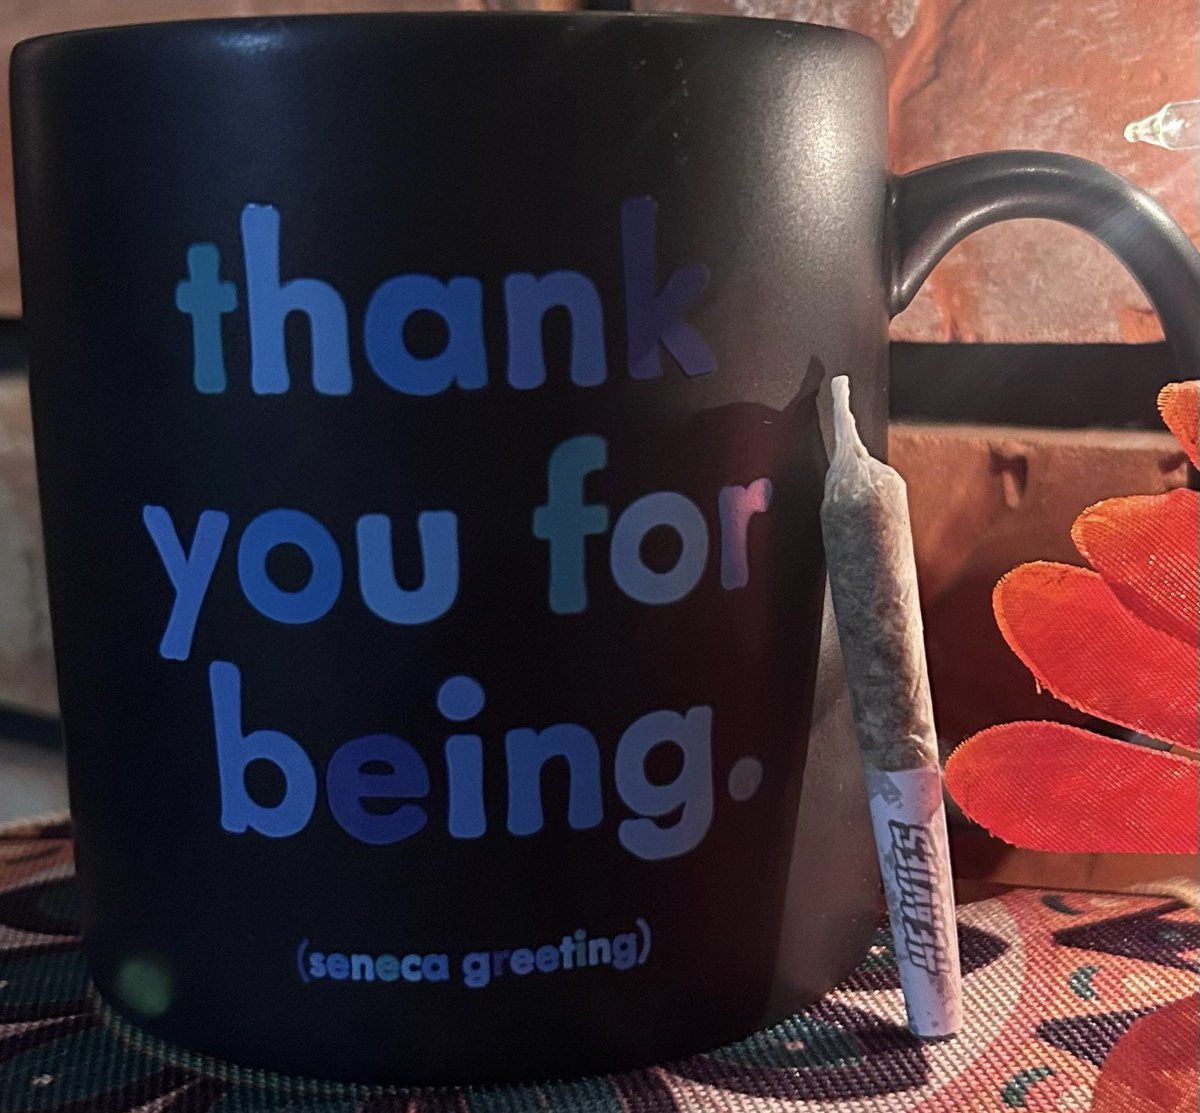 🫵You! 🫵You! 🫵And you too! Thank you for being uniquely, beautifully YOU🫵🫶 #StonerFam #CannaLand #Growmies #CannabisCommunity #Mmemberville🤟💚 #LegalizeIt #Gratitude #ThankfulThursday #ThursdayMotivation #LoveWins #SmokinMugMessage #ImaMakeYouSmile @SHREDWEED